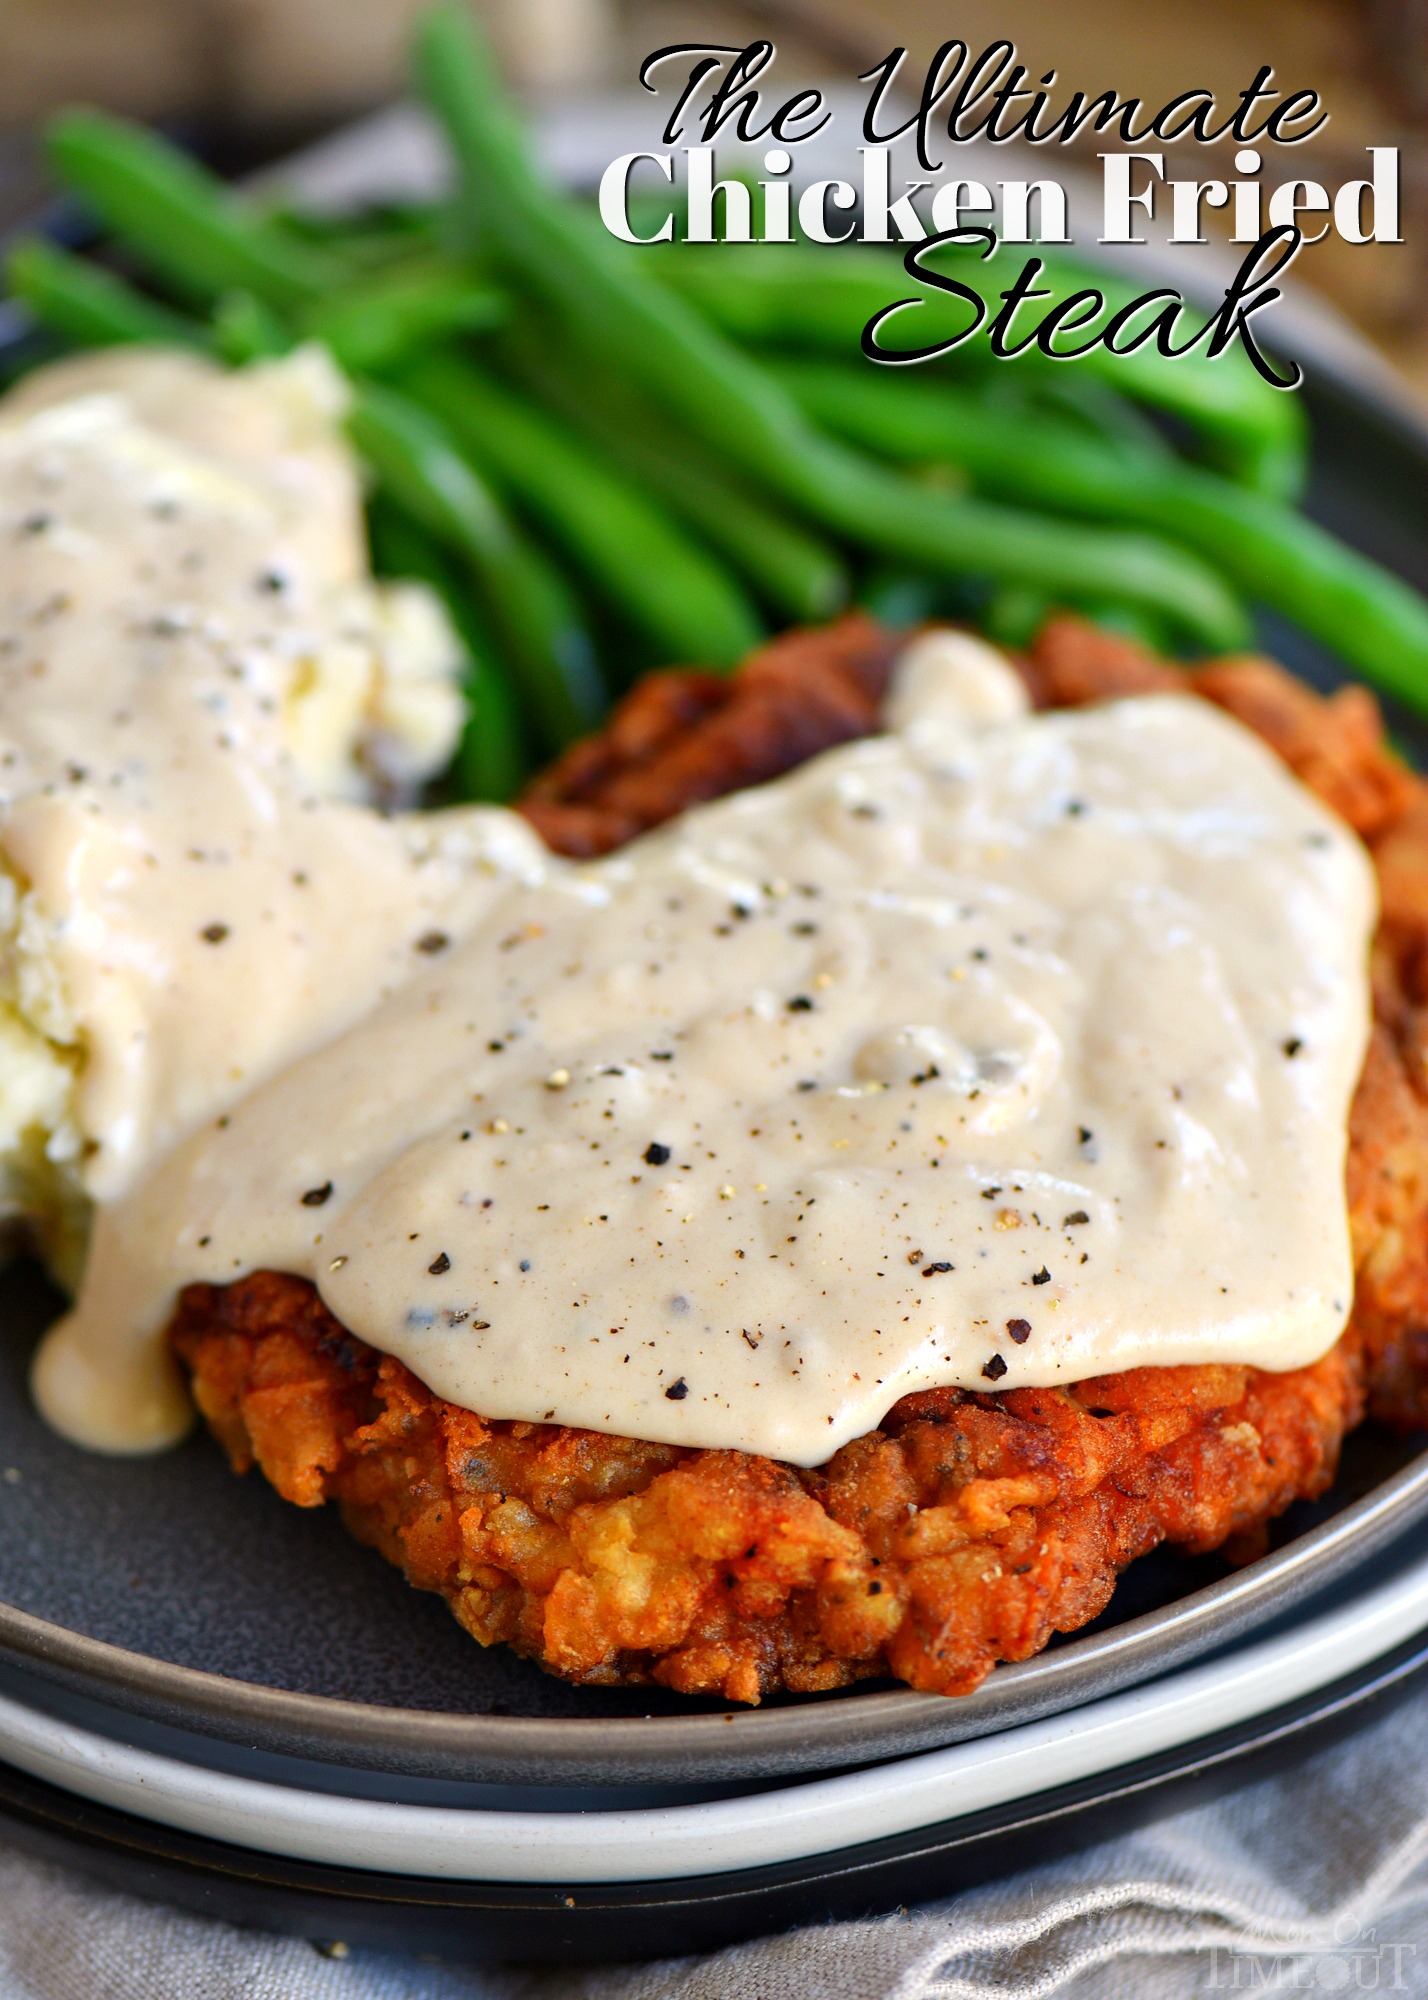 The Ultimate Chicken Fried Steak Recipe with Gravy - Mom On Timeout